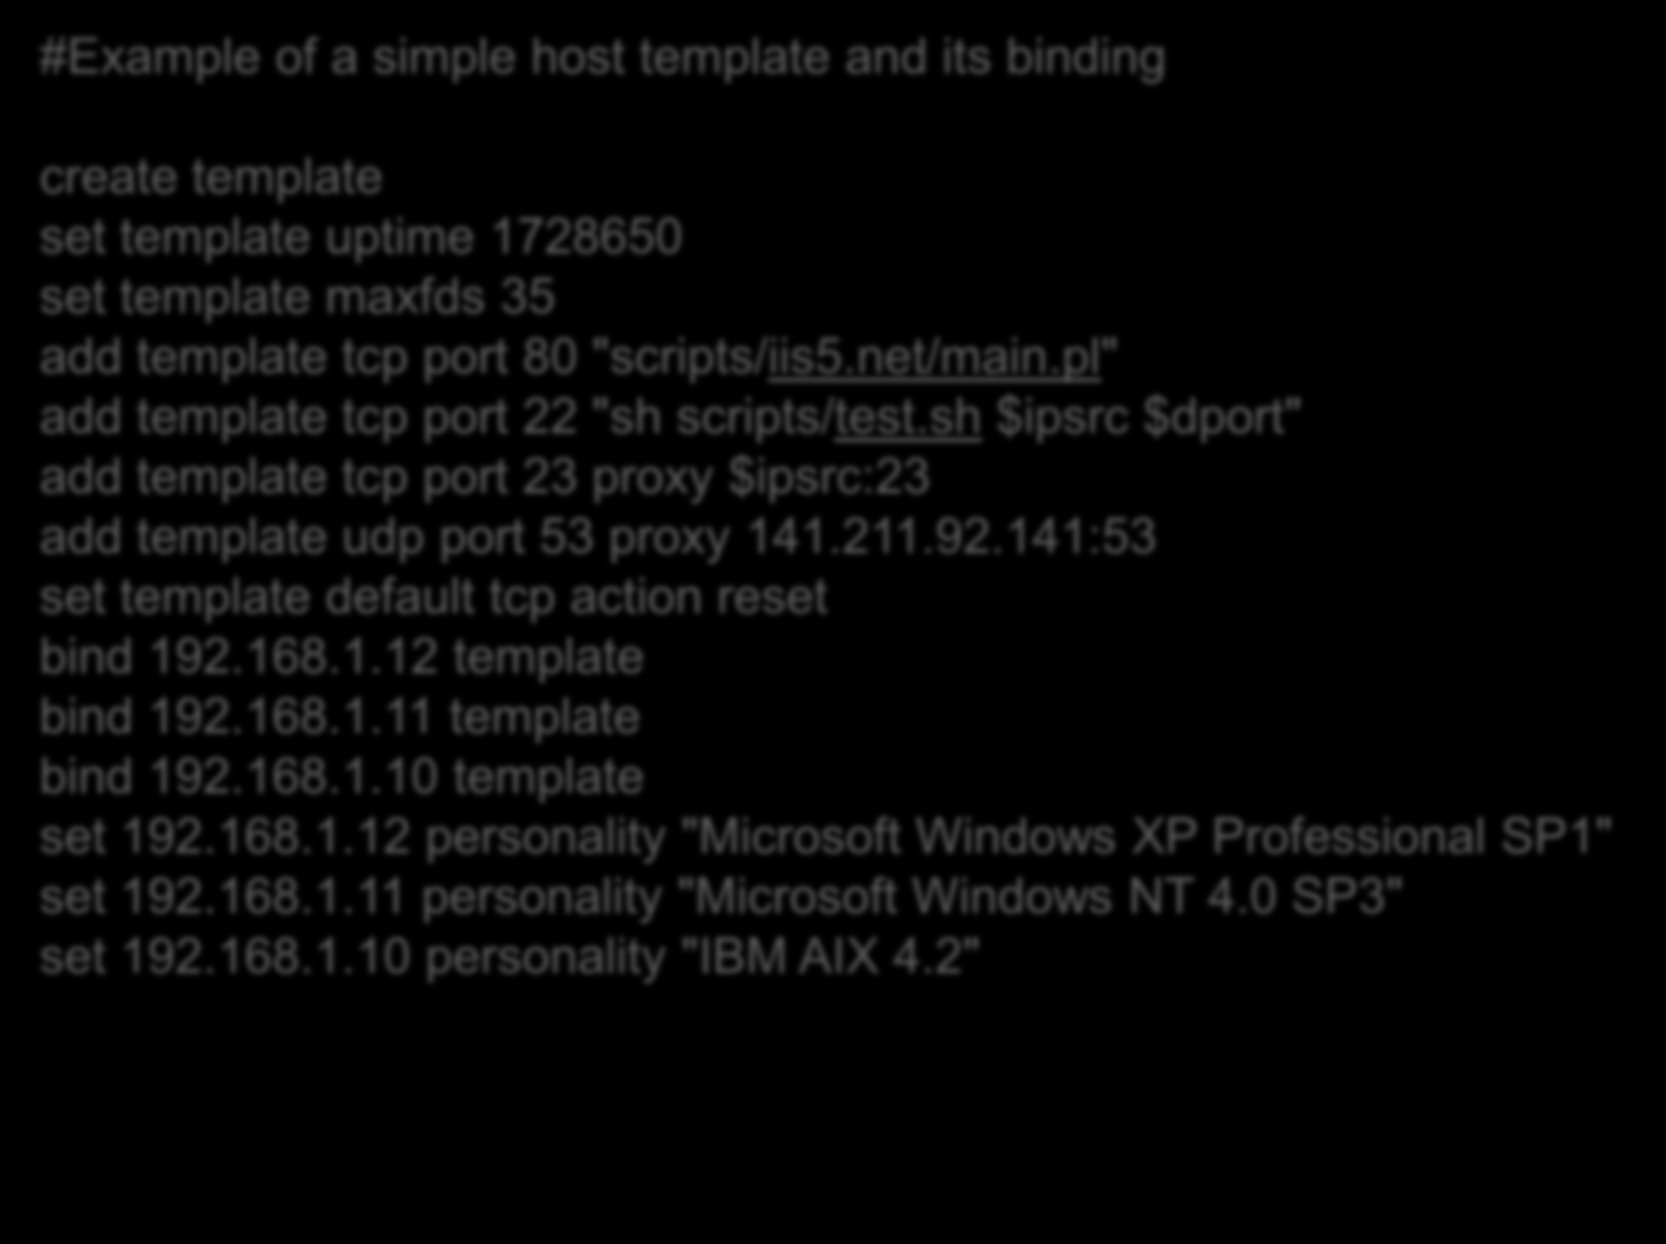 #Example of a simple host template and its binding create template set template uptime 1728650 set template maxfds 35 add template tcp port 80 "scripts/iis5.net/main.